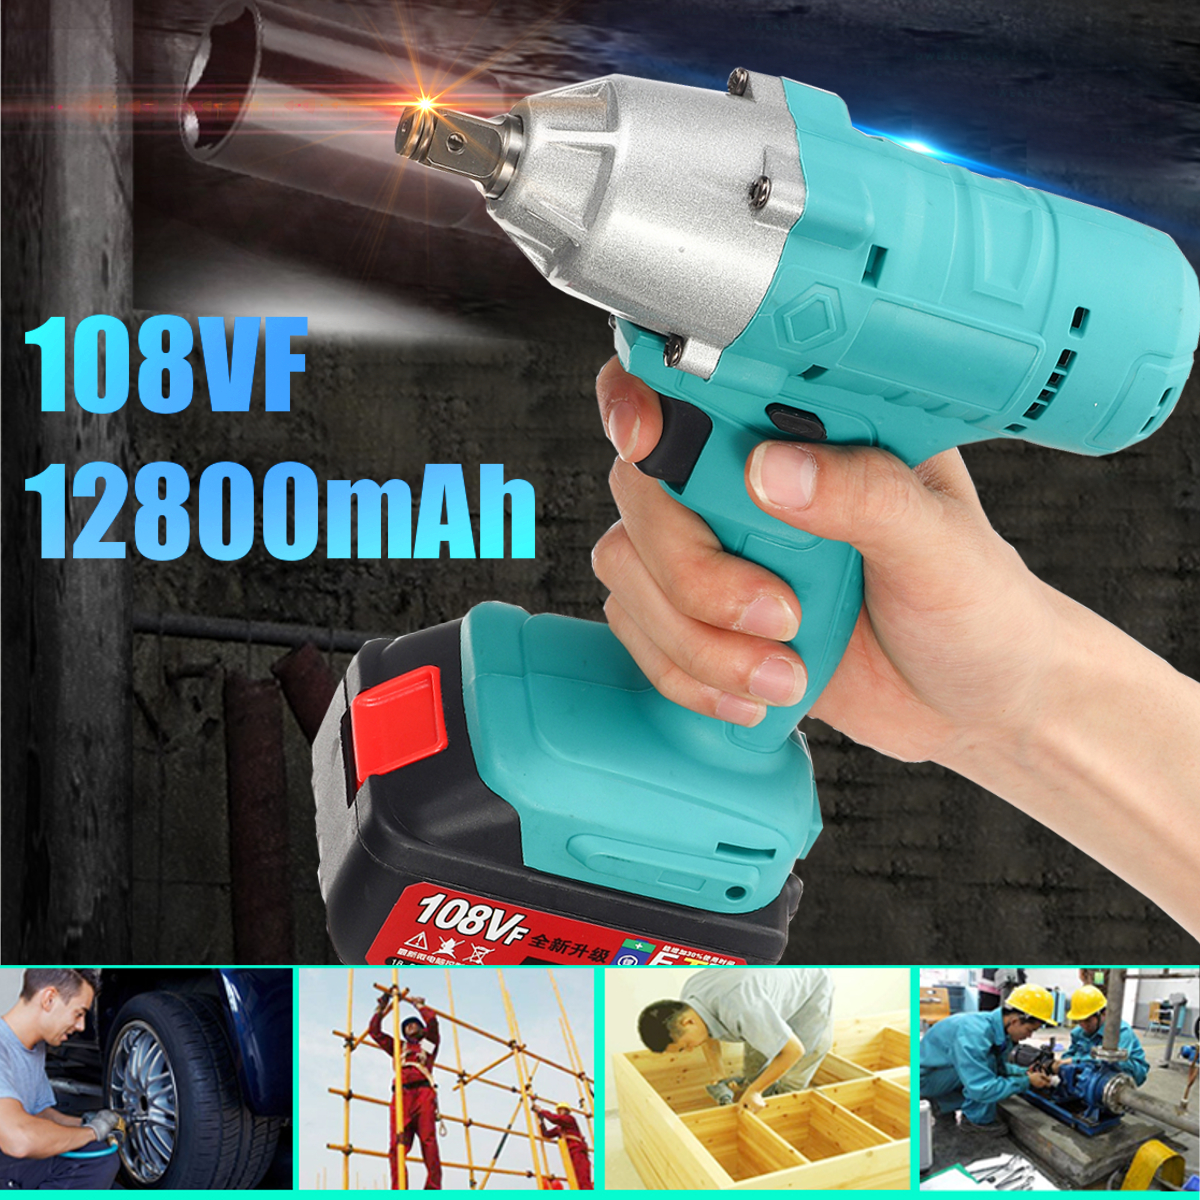 108VF 12800 mAh Cordless Impact Wrench Kit with 2 Rechargeable Lithium-Ion Battery Electric Wrench Waterproof